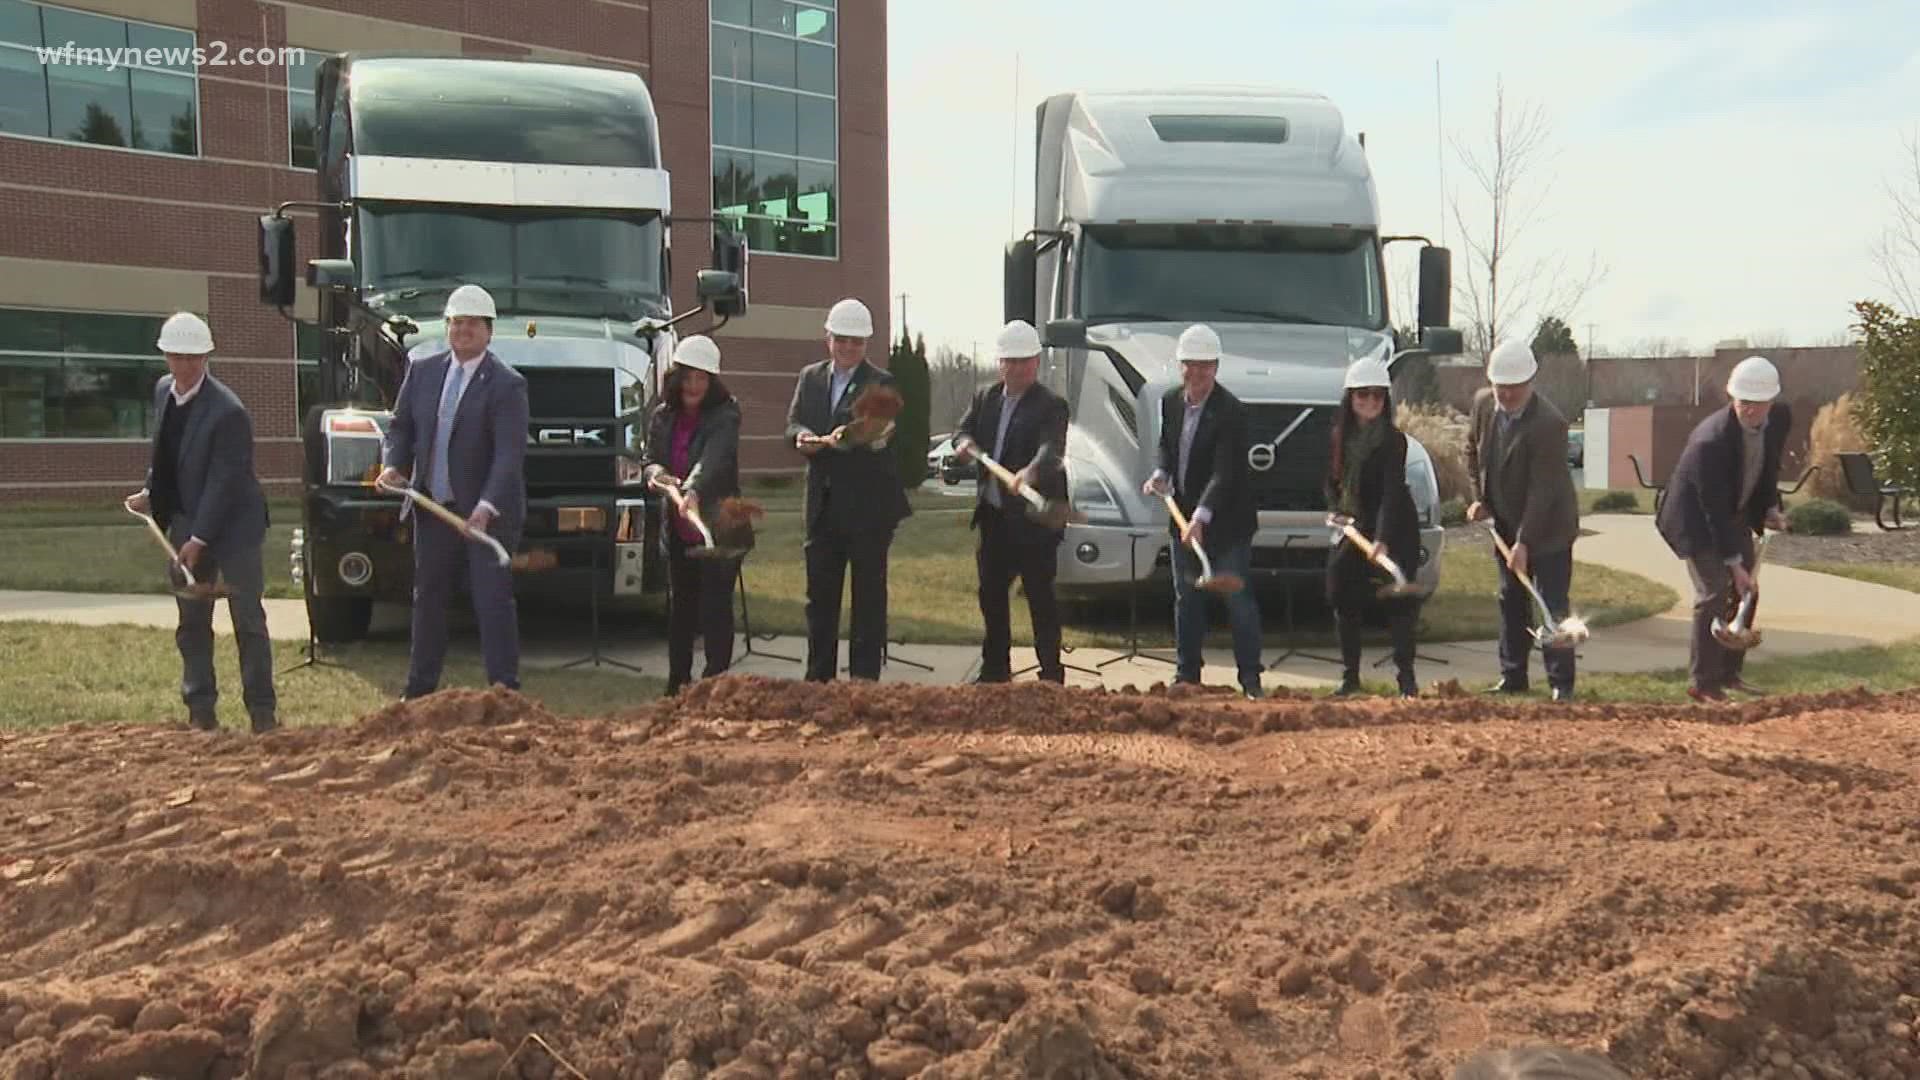 Volvo announced a new global headquarters for financial services coming to Greensboro.